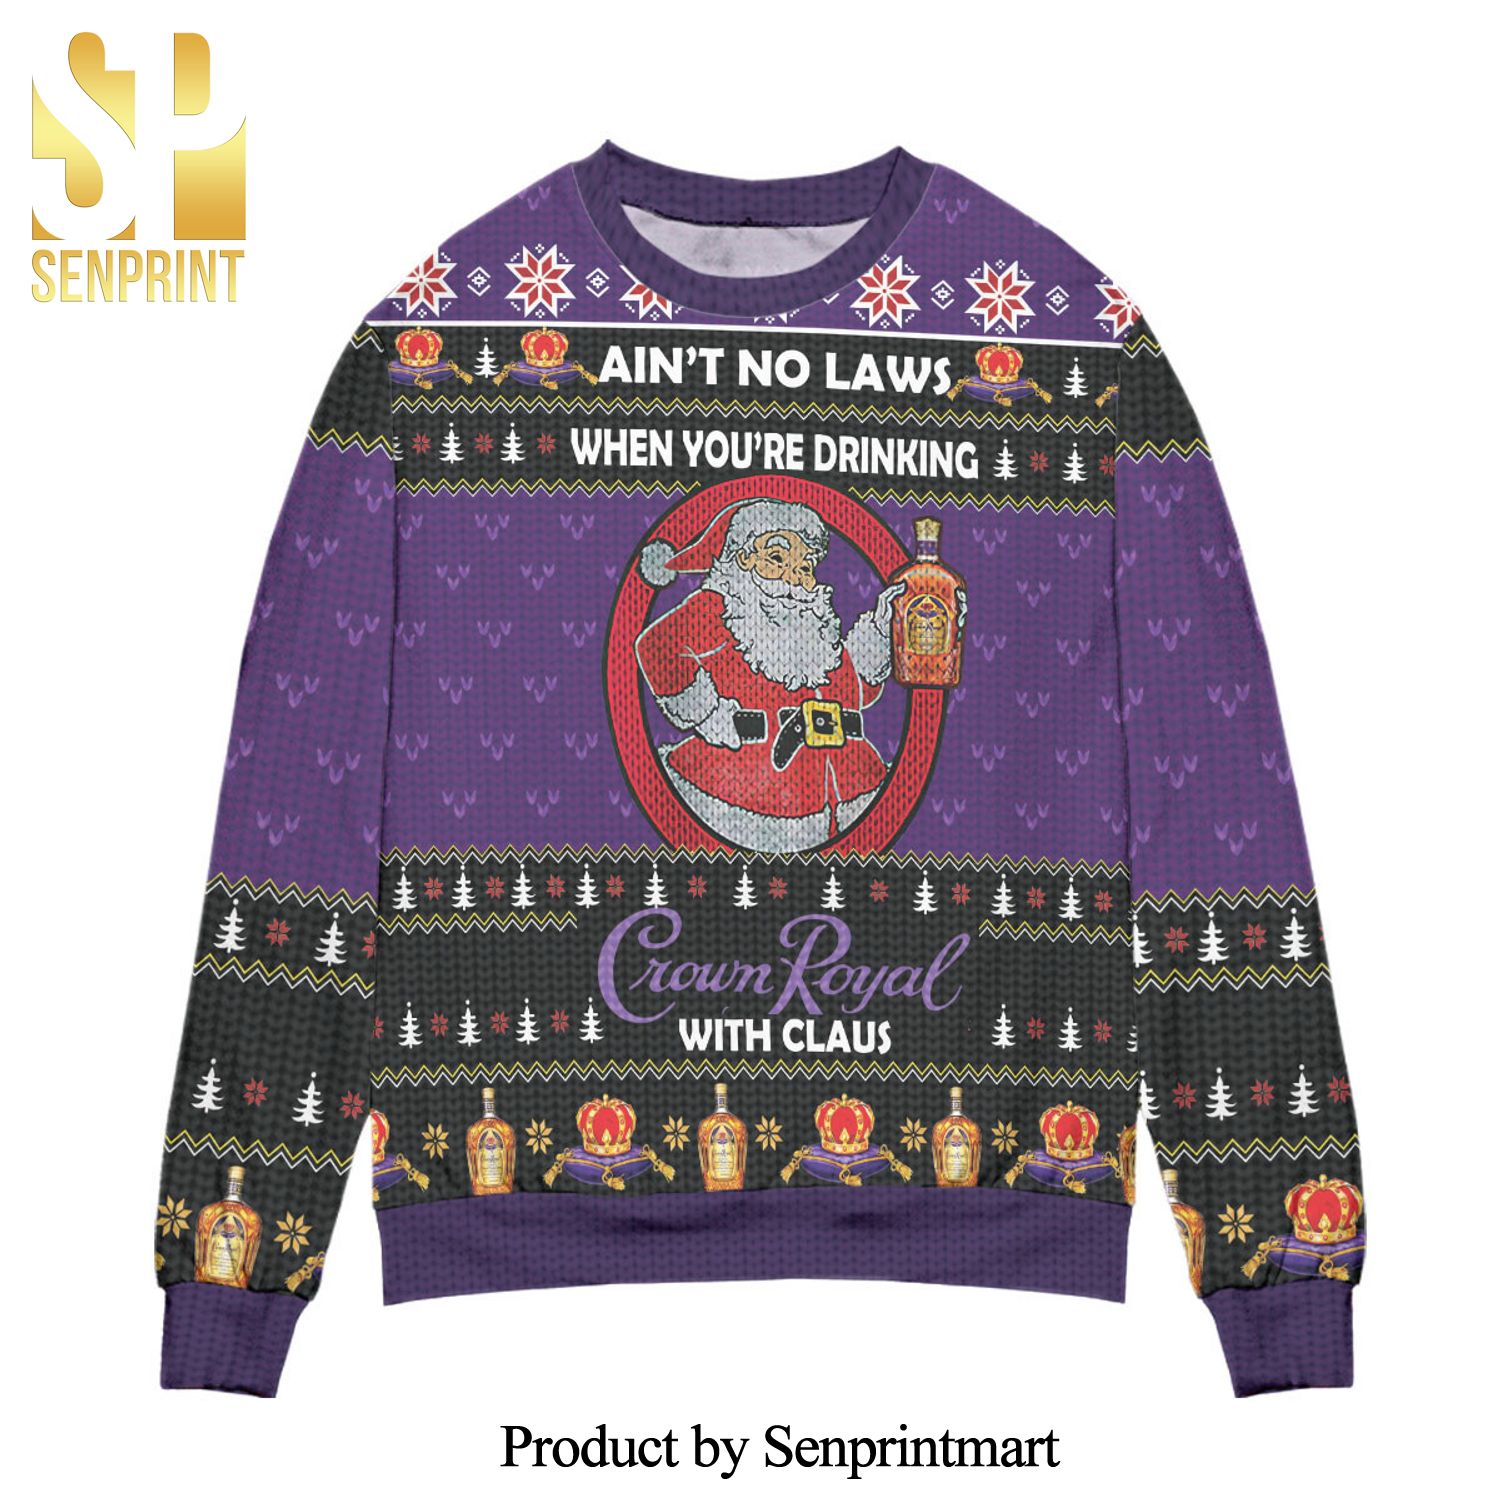 Ain’t No Laws When You’re Drinking Crown Royal With Claus Knitted Ugly Christmas Sweater – Purple